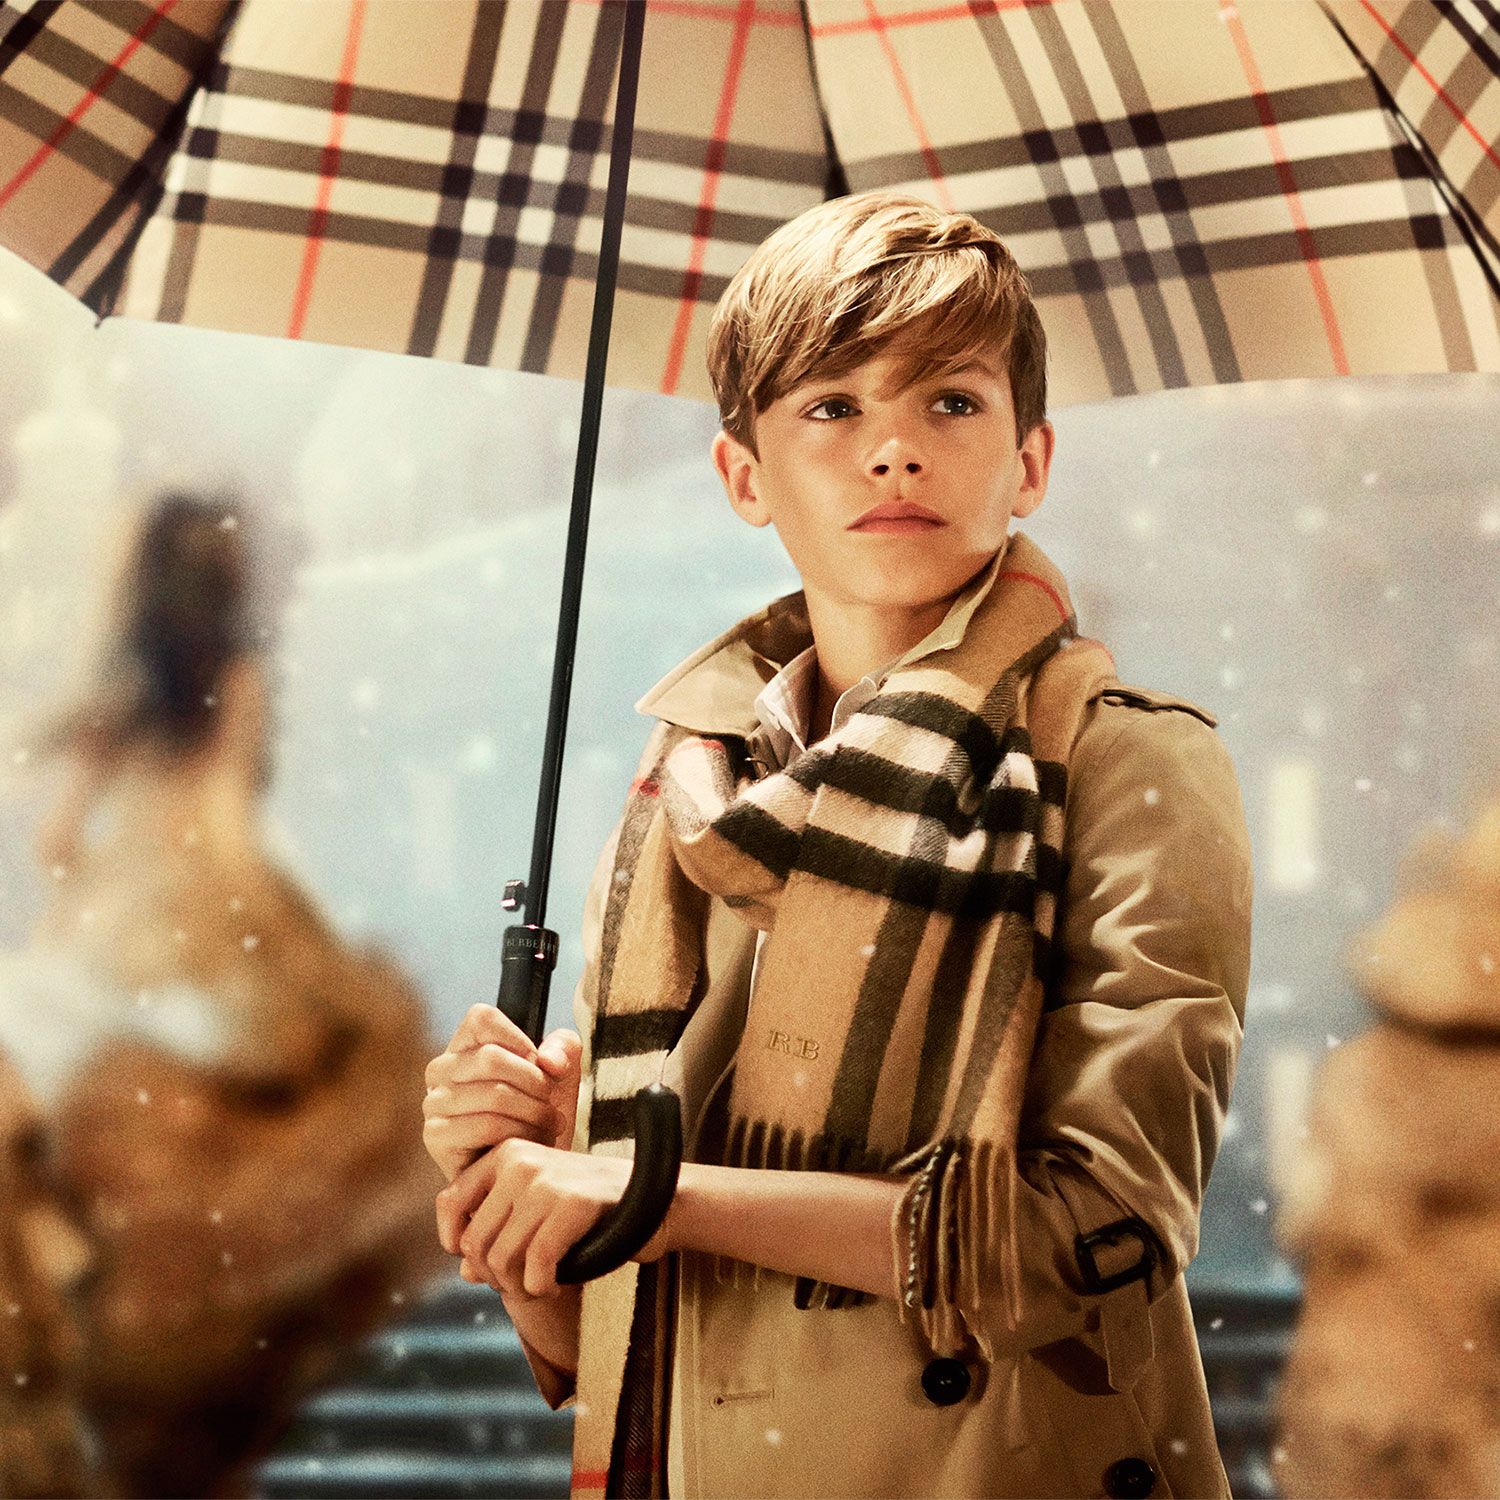 abstraktion Wade synet Romeo Beckham for Burberry Campaign 2014 - Romeo Beckham in Burberry  Festive Campaign Video